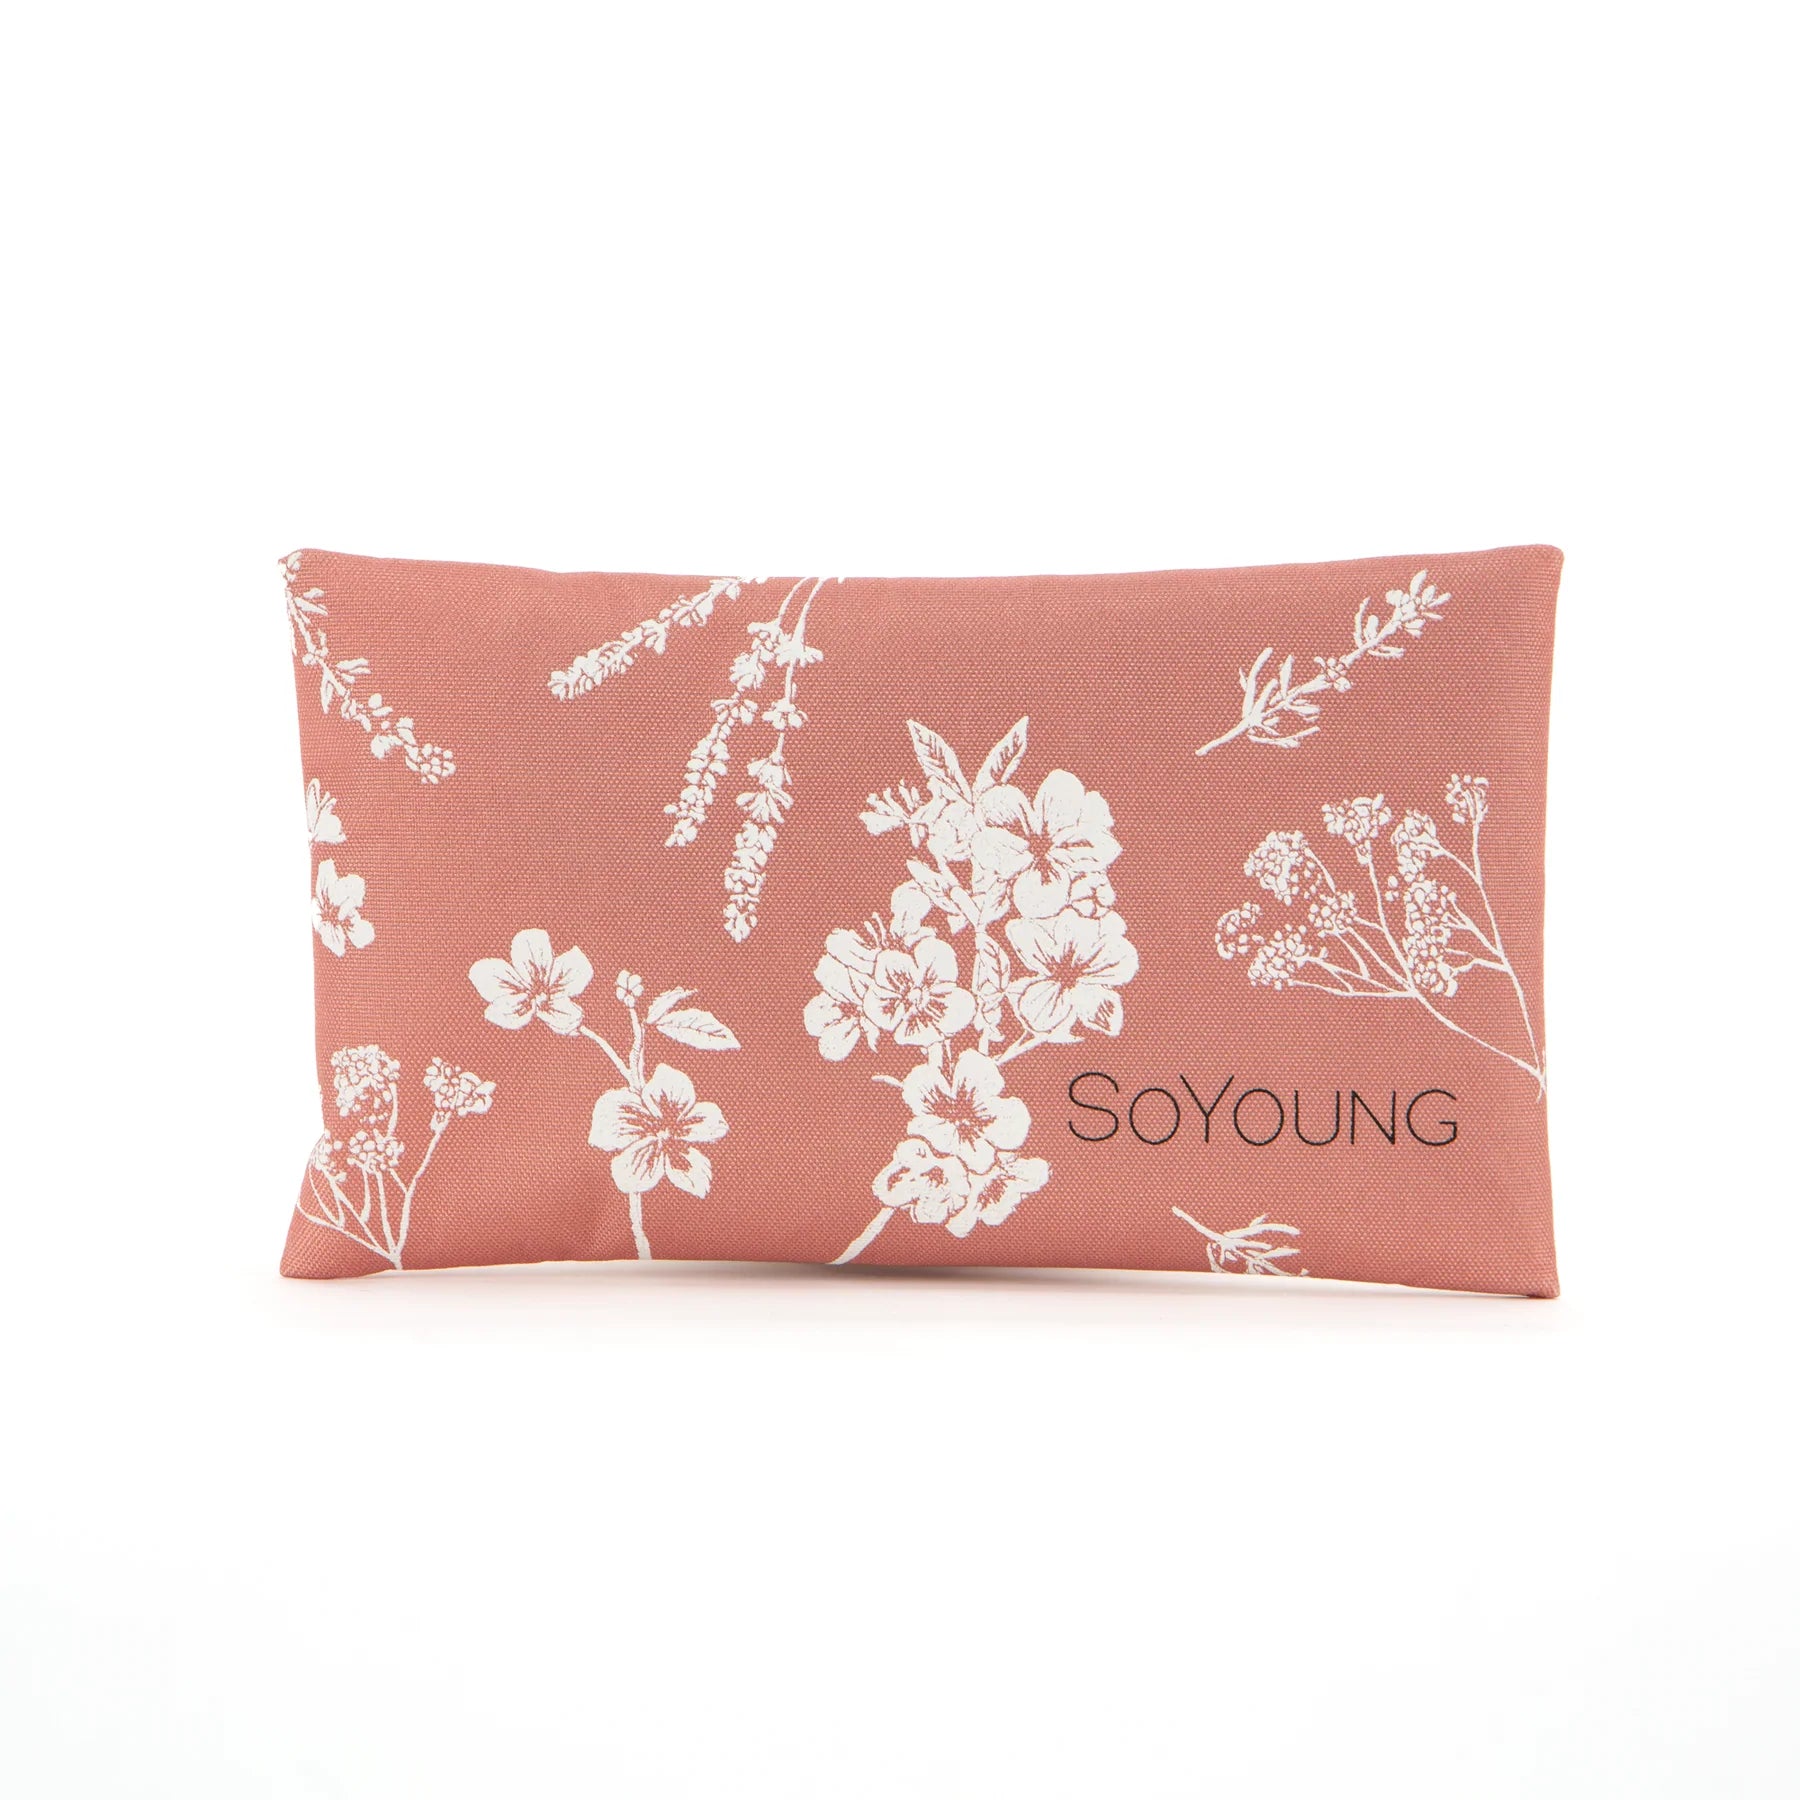 Ice pack - Condensation Free on the go SoYoung White Field Flowers Prettycleanshop